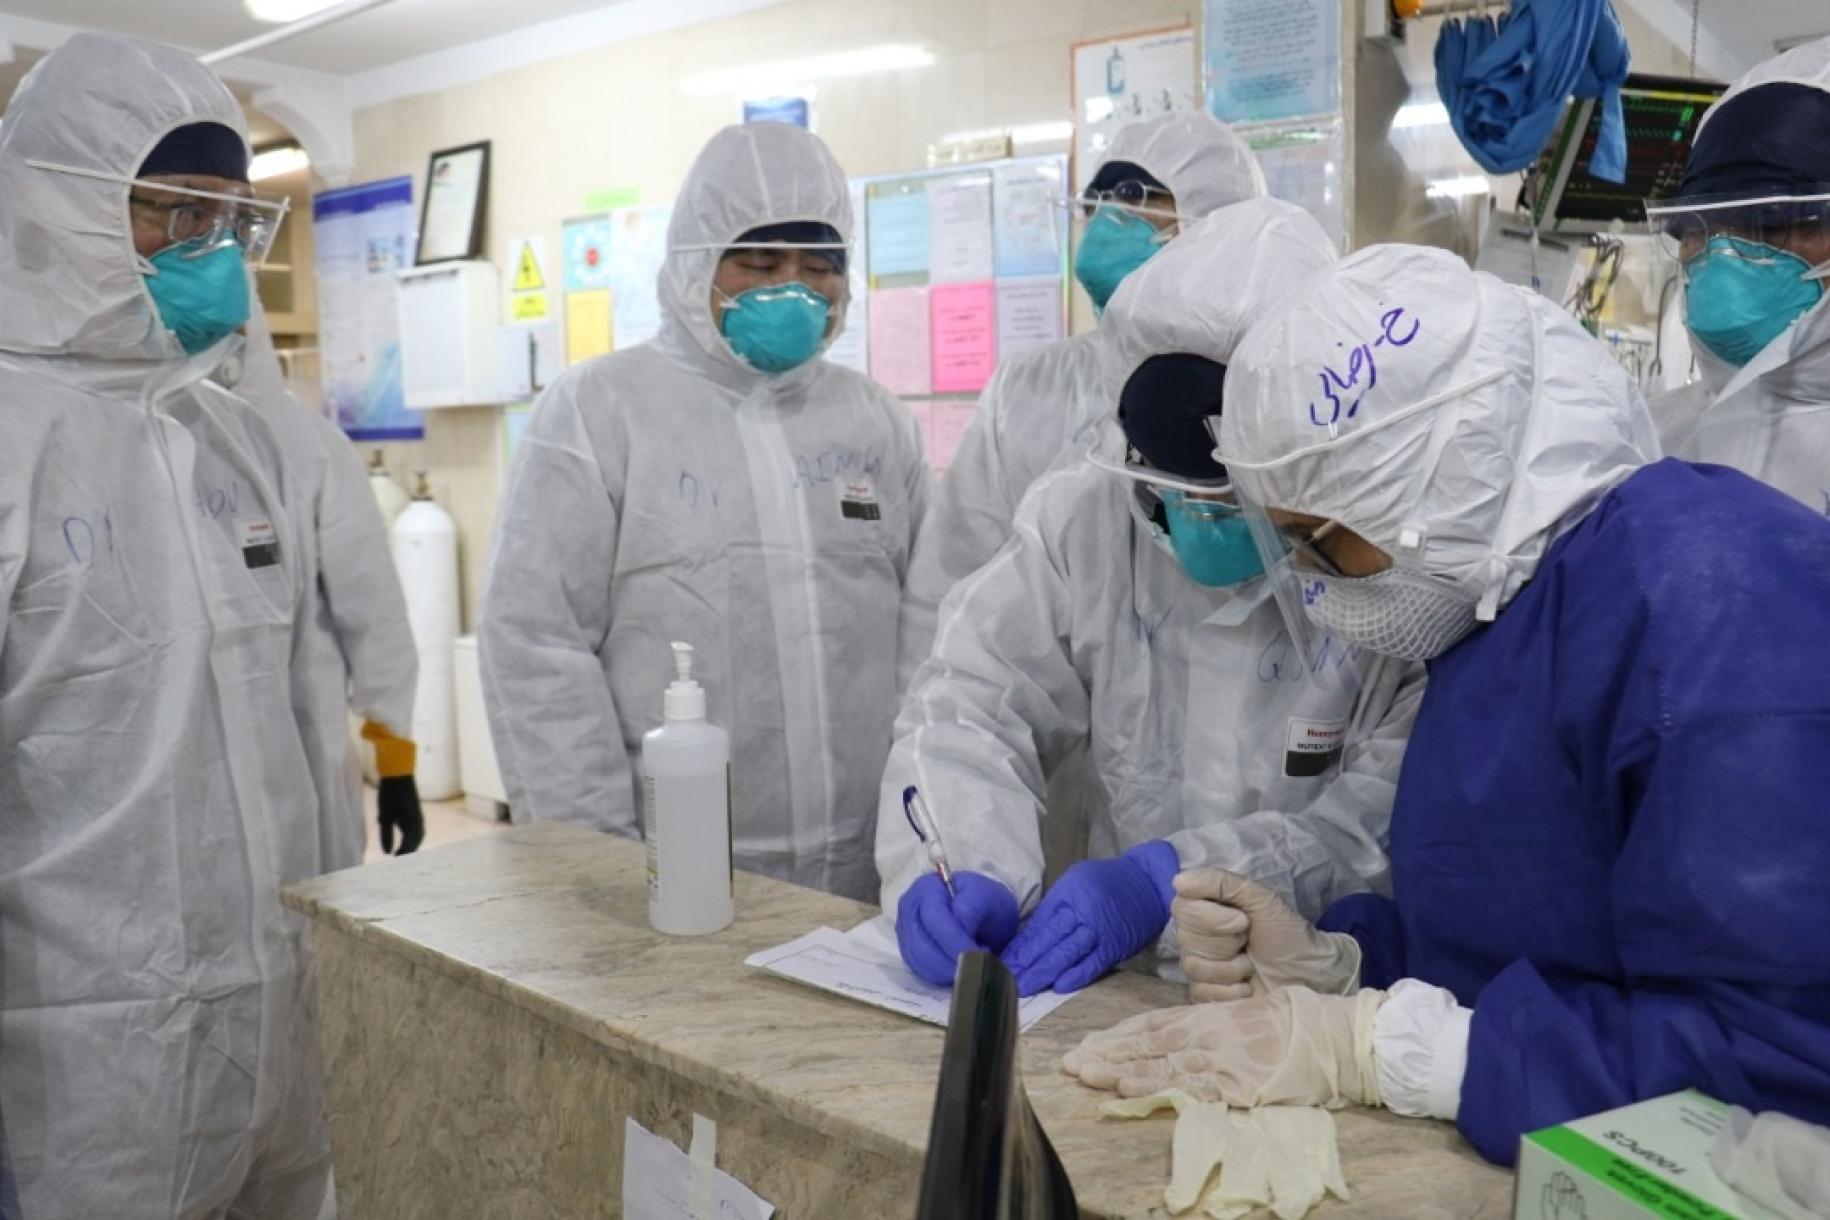 WHO staff visited the Masih Daneshvari Hospital in North of Tehran. All wearing head-to-toe personal protective equipment, they review lab documentation. 